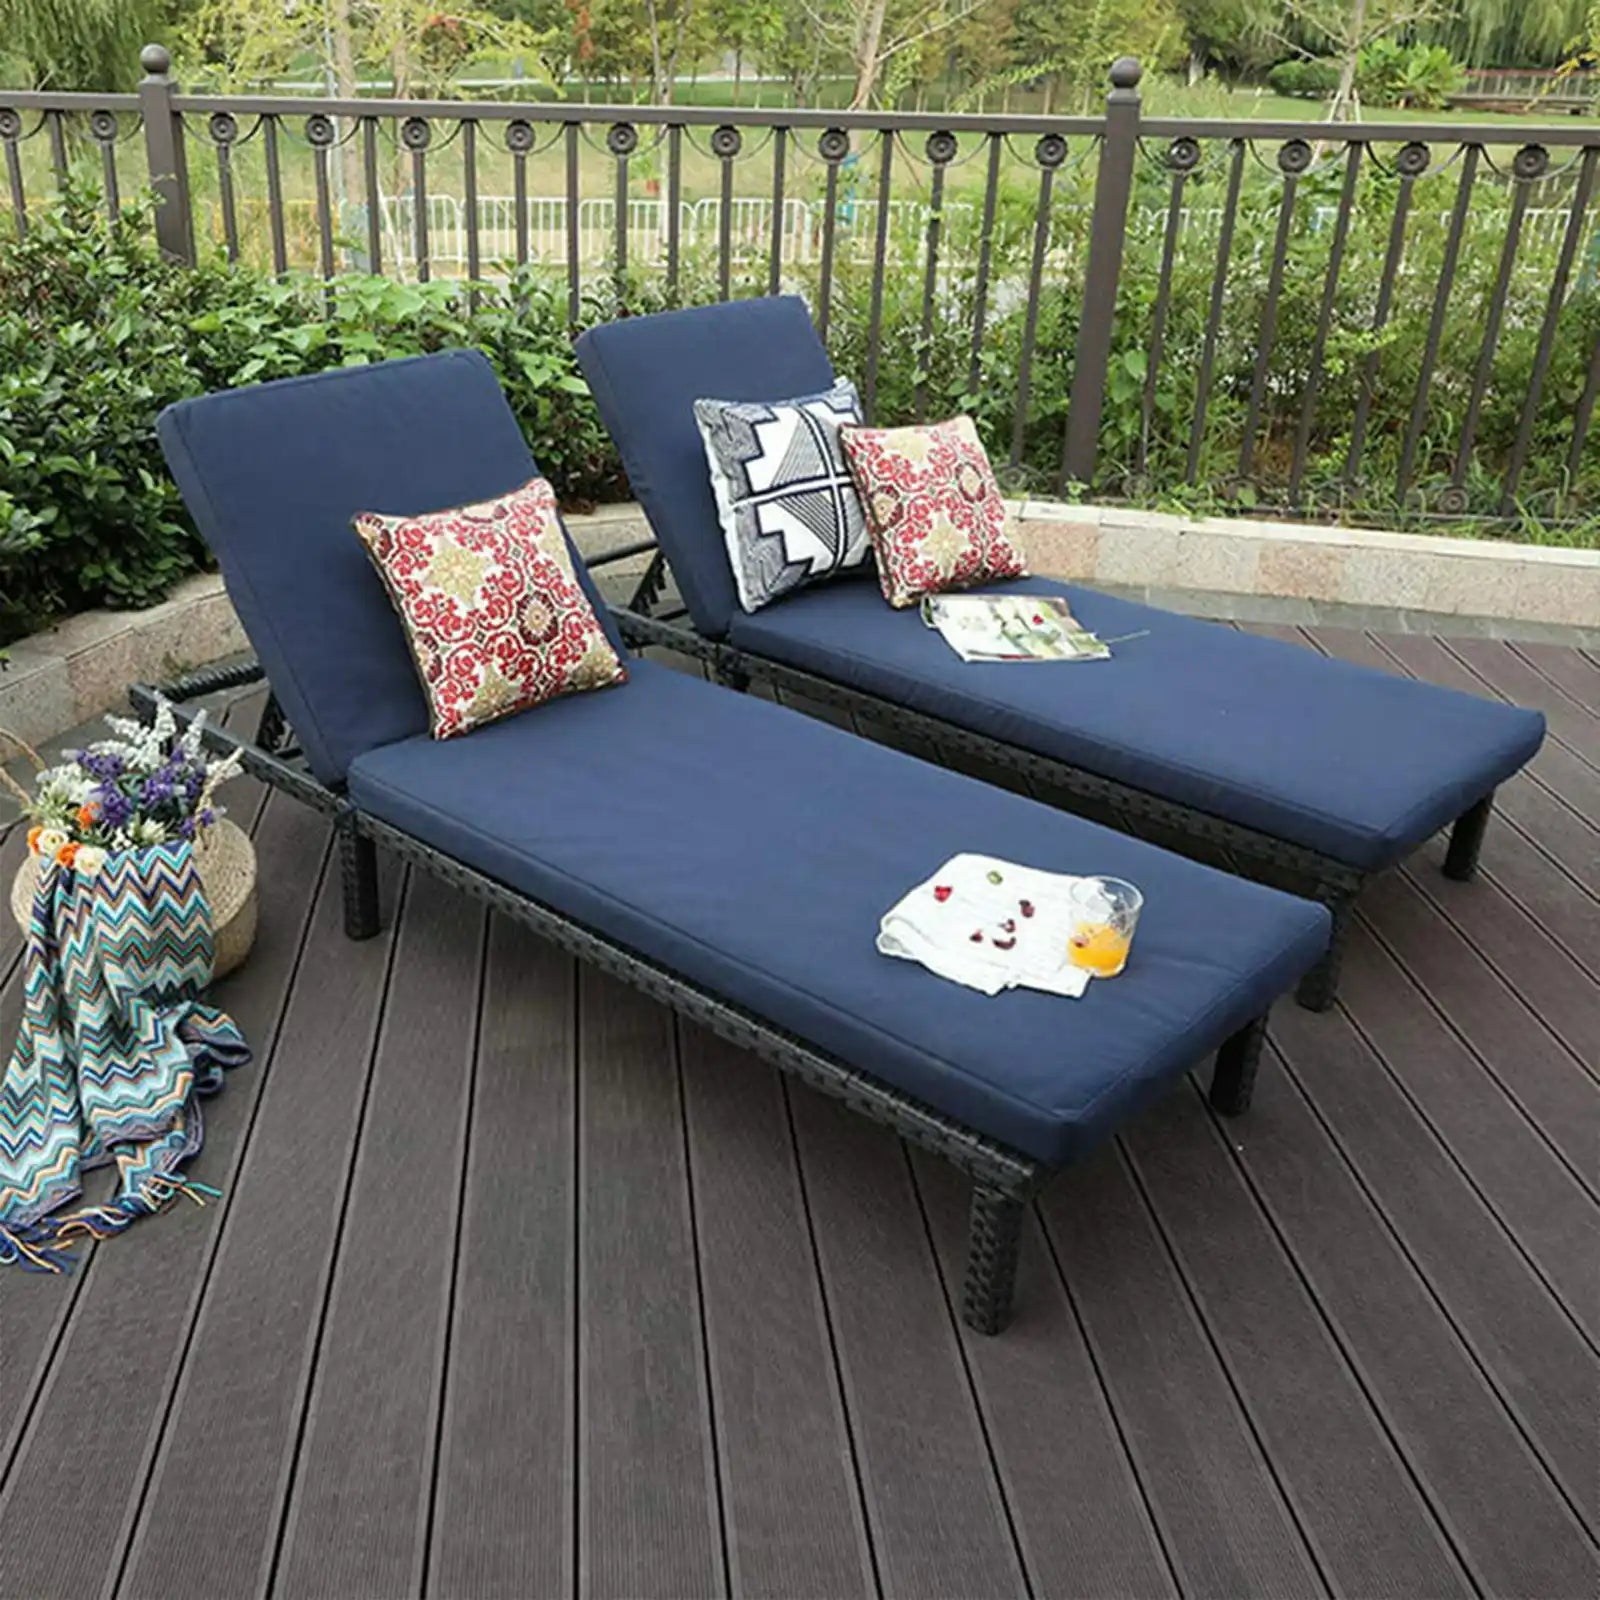 Outdoor Patio Wicker Rattan Chaise Lounge Chairs with Cushion & Adjustable Backrest, Set of 2